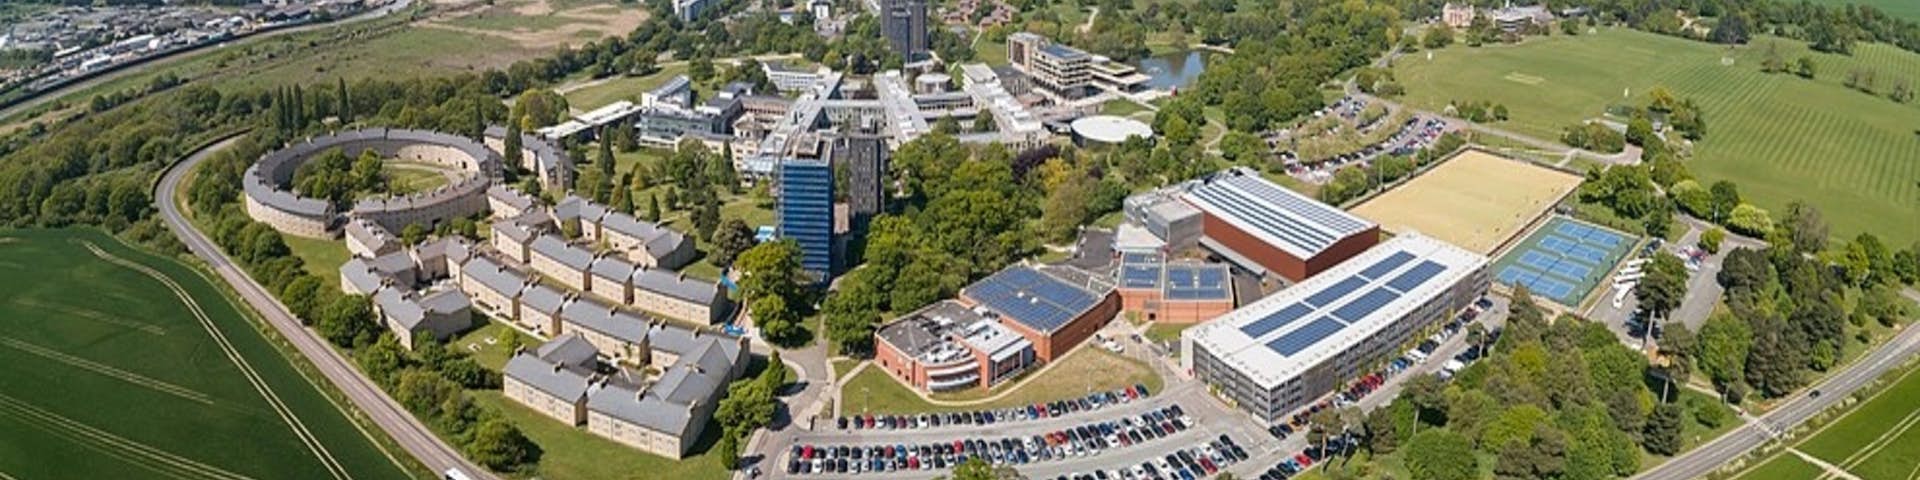 Accounting and Financial Management at University of Essex 